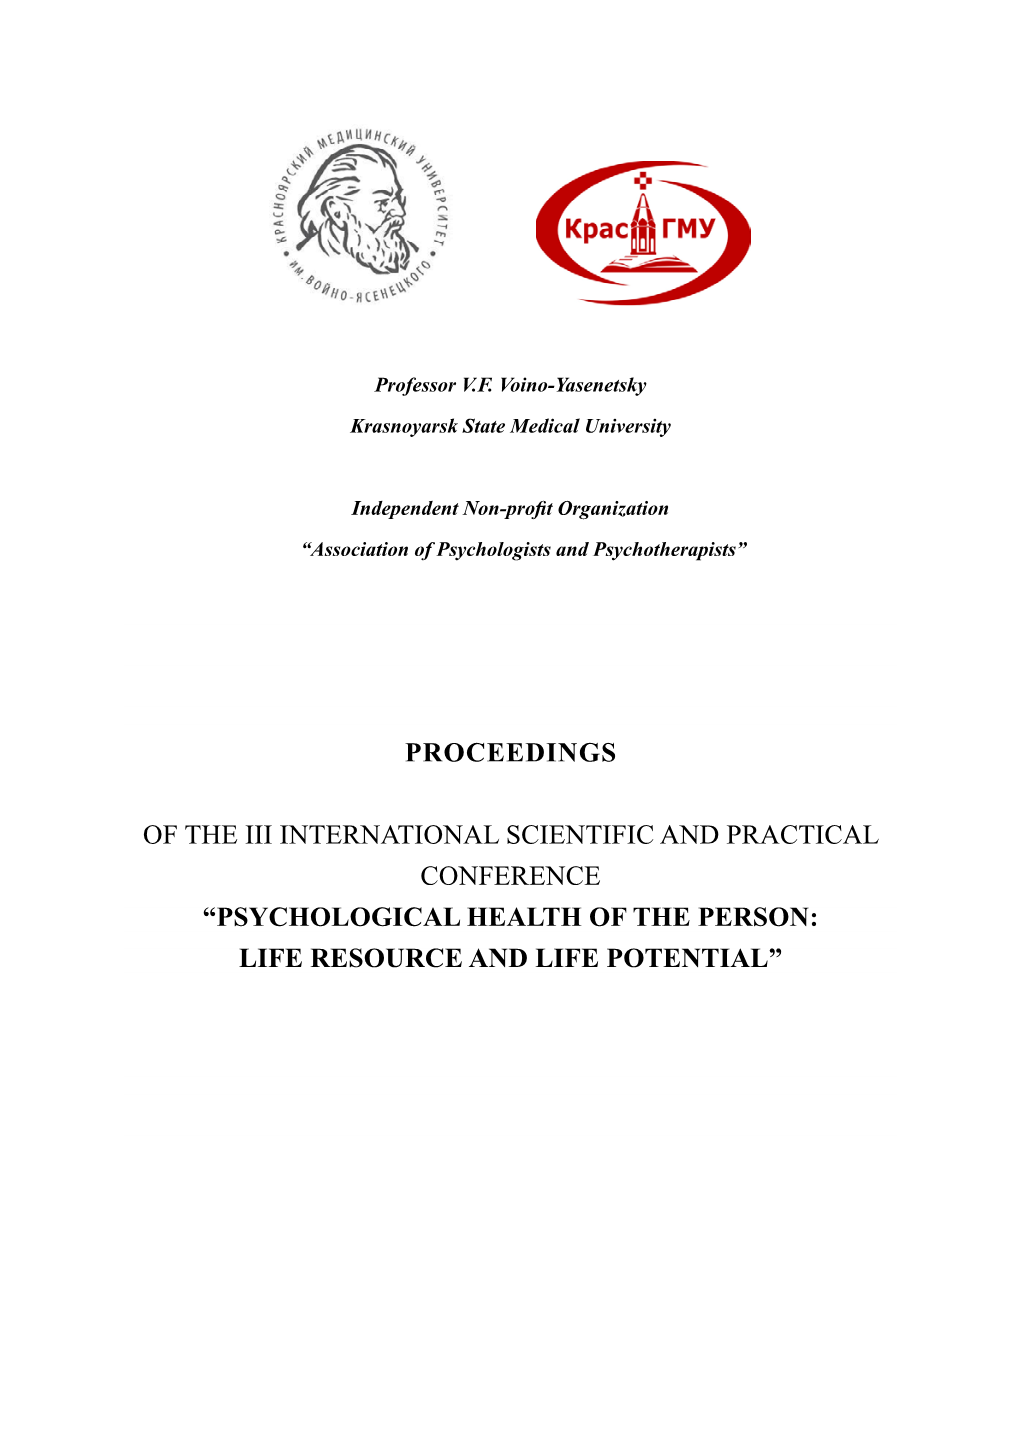 Proceedings of the III International Scientific and Practical Conference “Psychological Health of the Person: Life Resource and Life Potential”